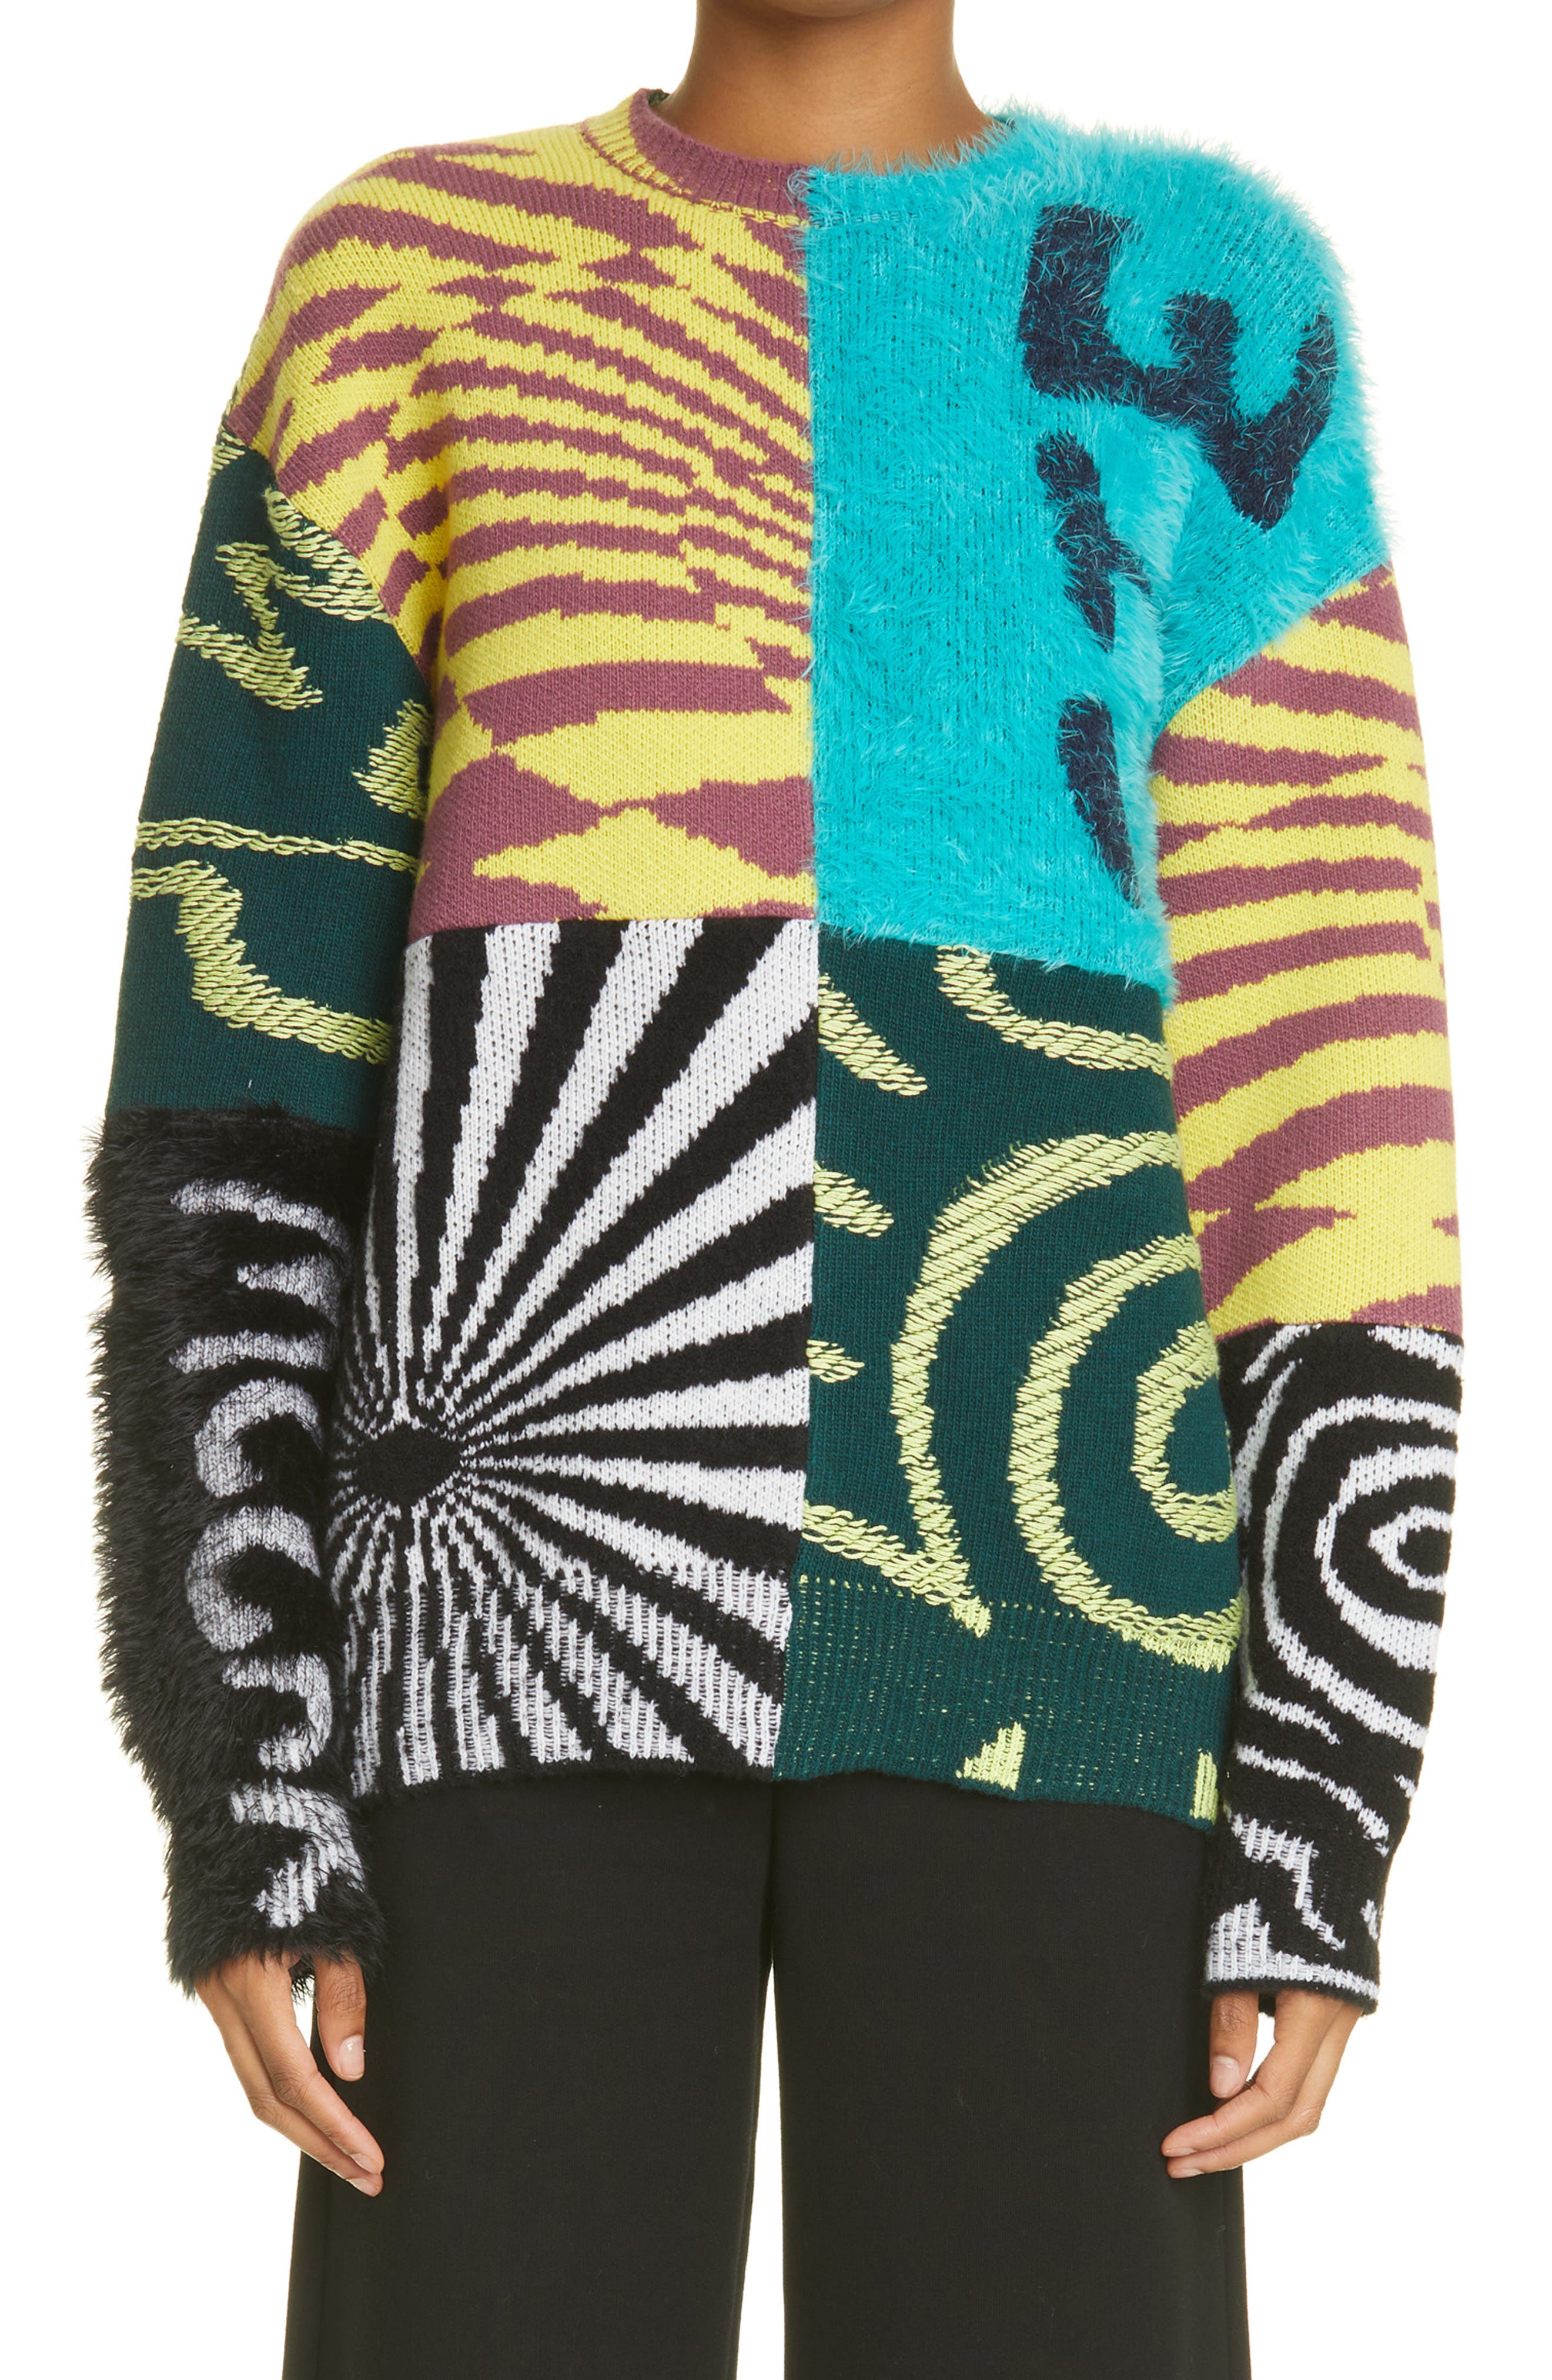 Stella McCartney x Ed Curtis Unisex Shared 3 Patchwork Wool Sweater in Multicolor at Nordstrom